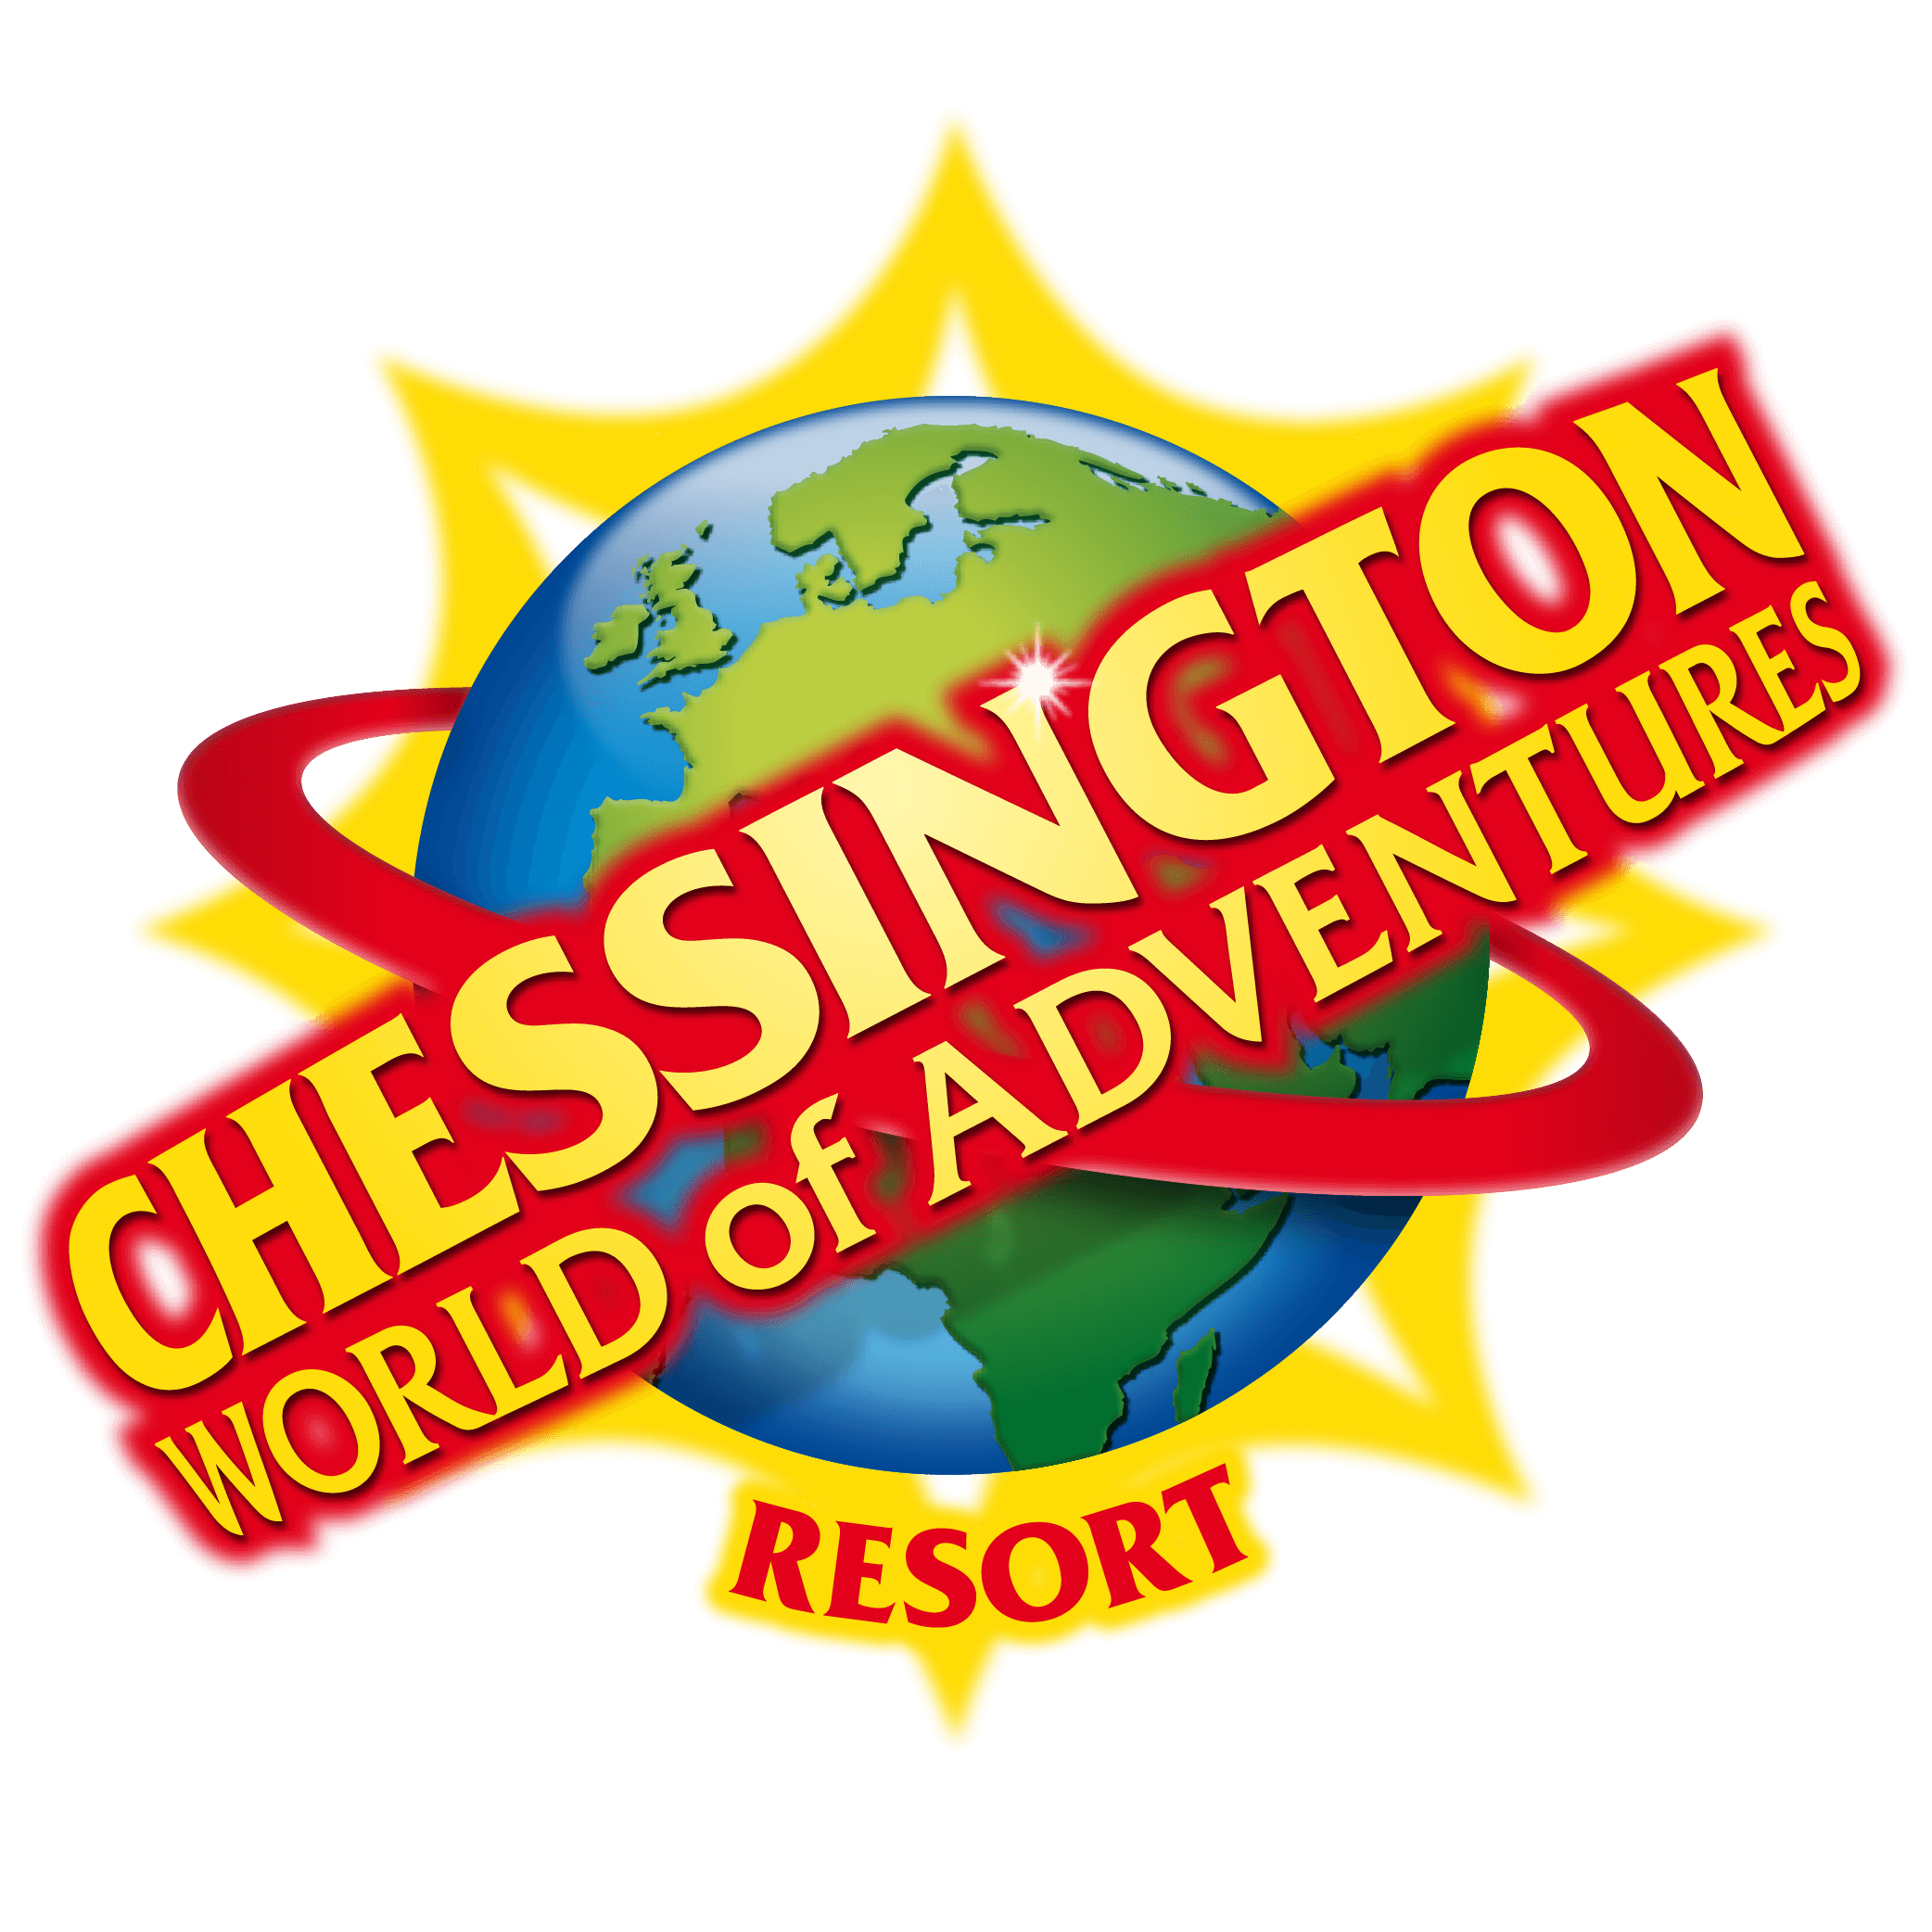 Head of Health and Safety (Chessington)